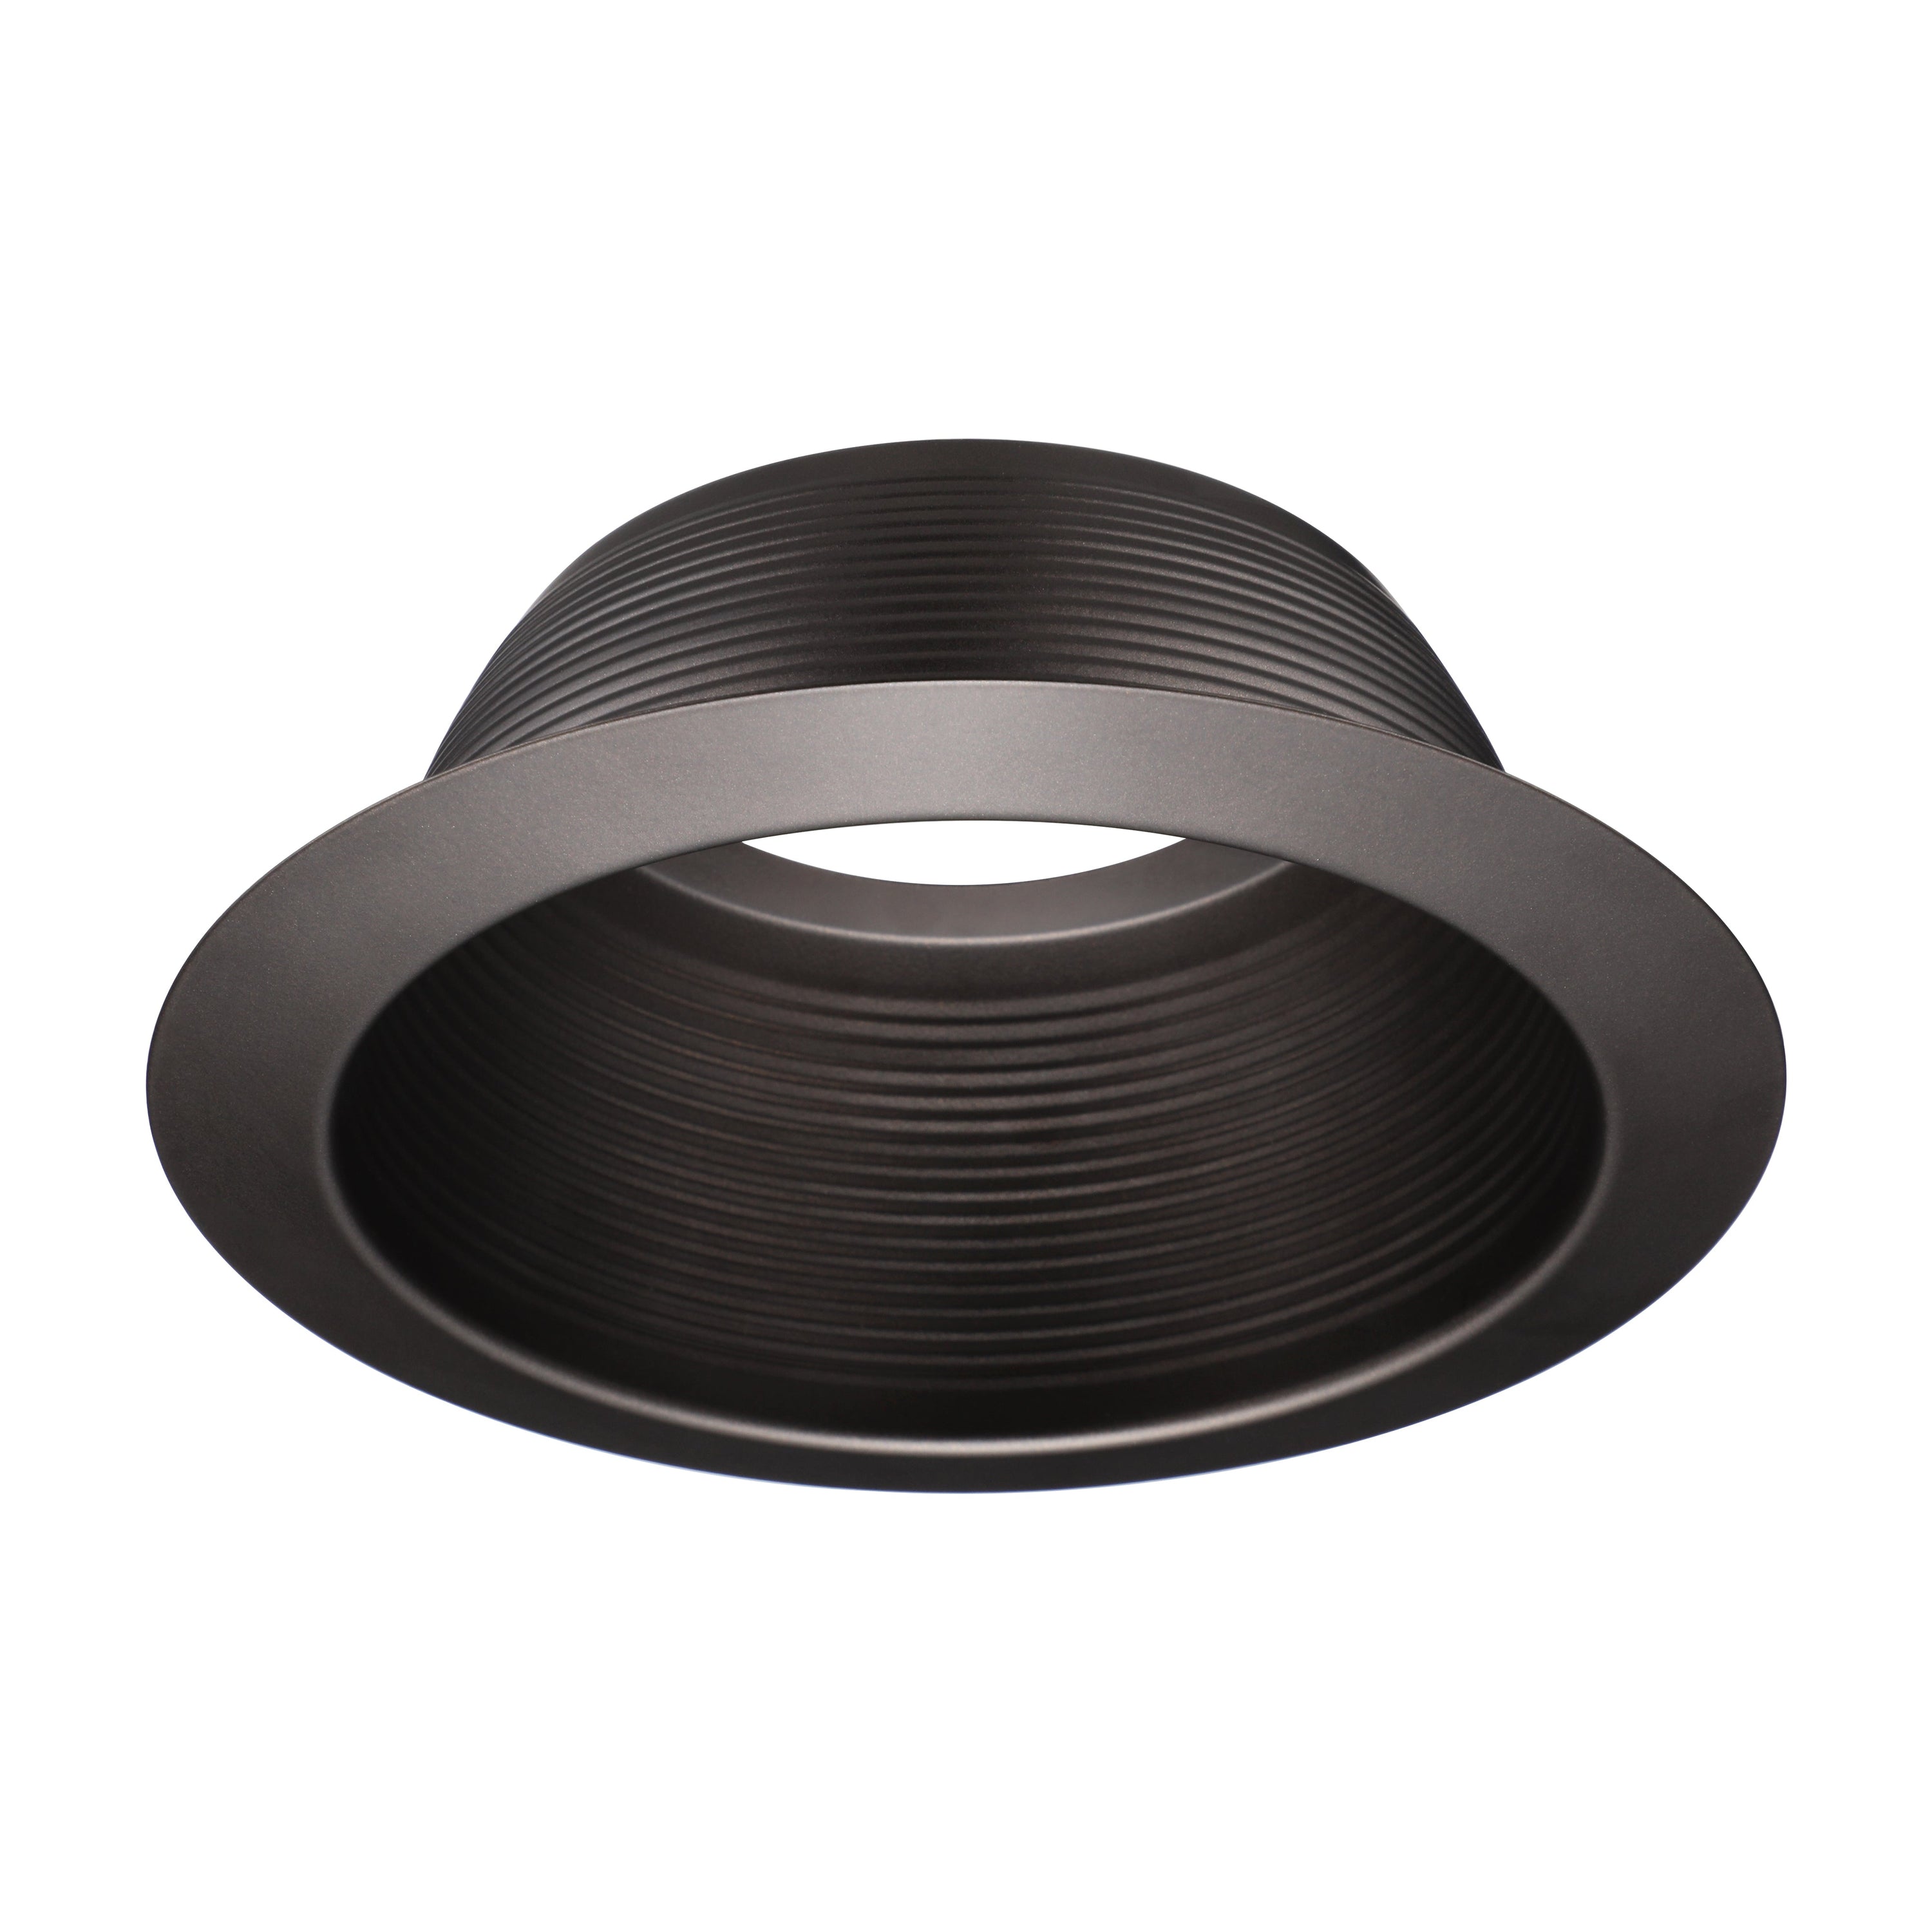 TORCHSTAR 6" Stepped Baffle Trim - Oil Rubbed Bronze